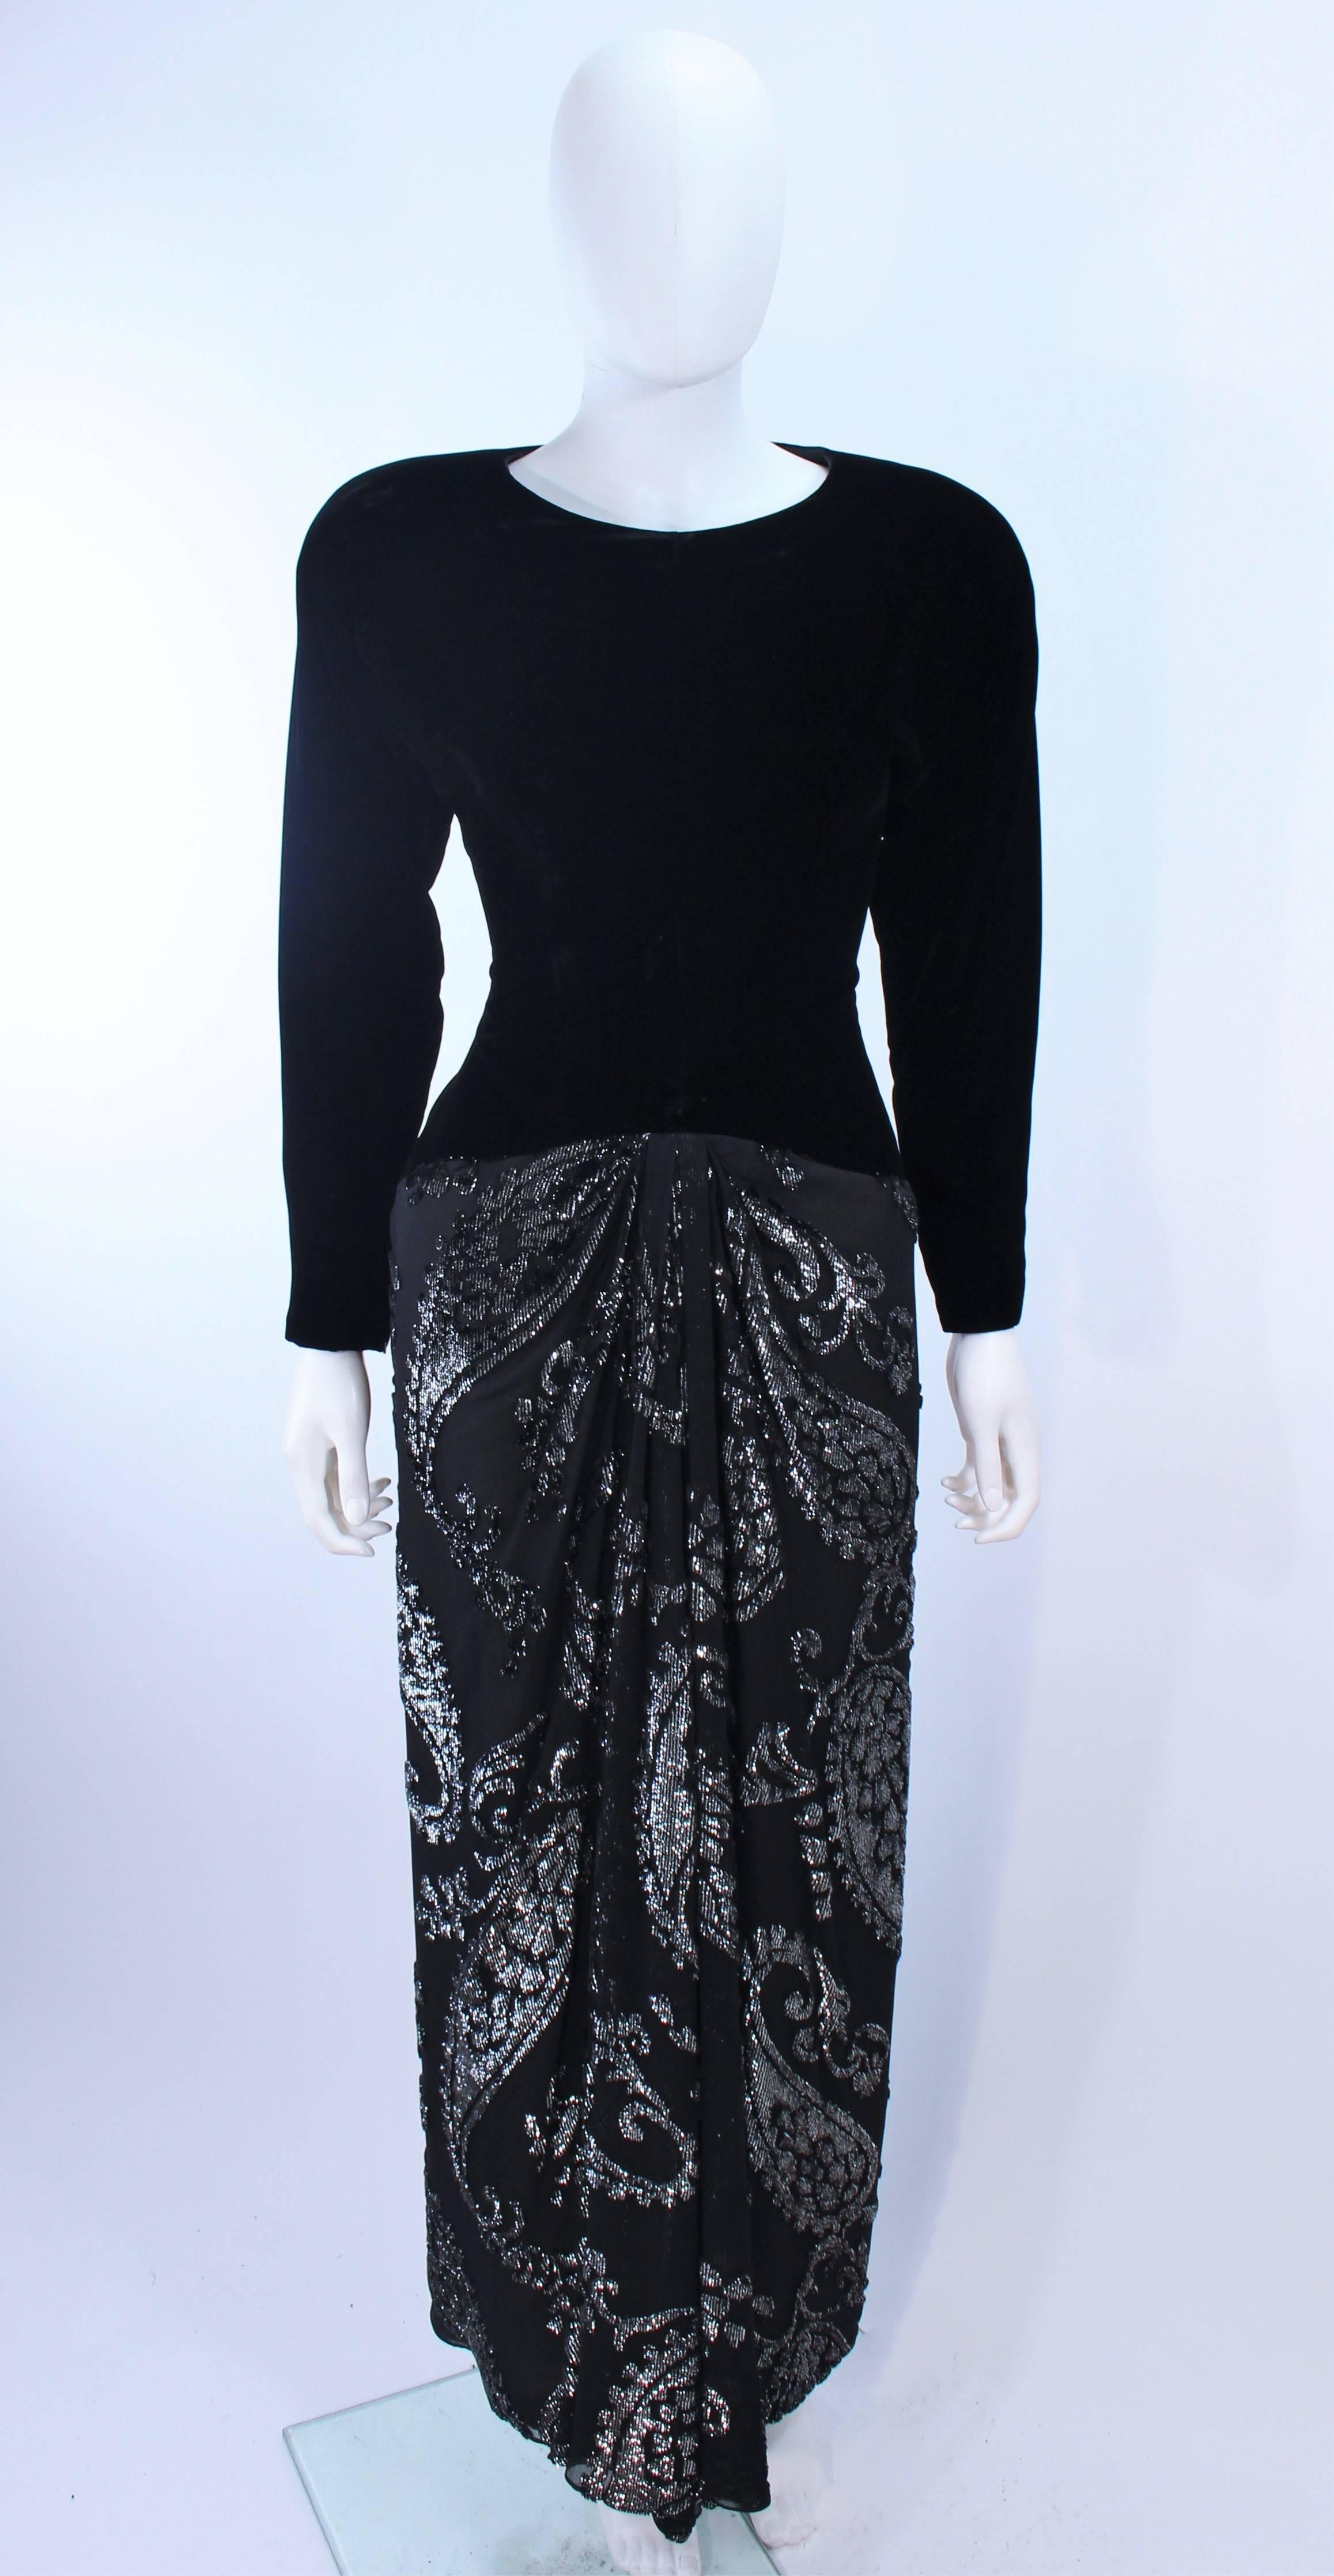 This Frank Tignino gown is composed of a velvet bodice with a draped silk lame skirt. There is a center back zipper closure. In excellent vintage condition. Beautiful design.

**Please cross-reference measurements for personal accuracy. Size in